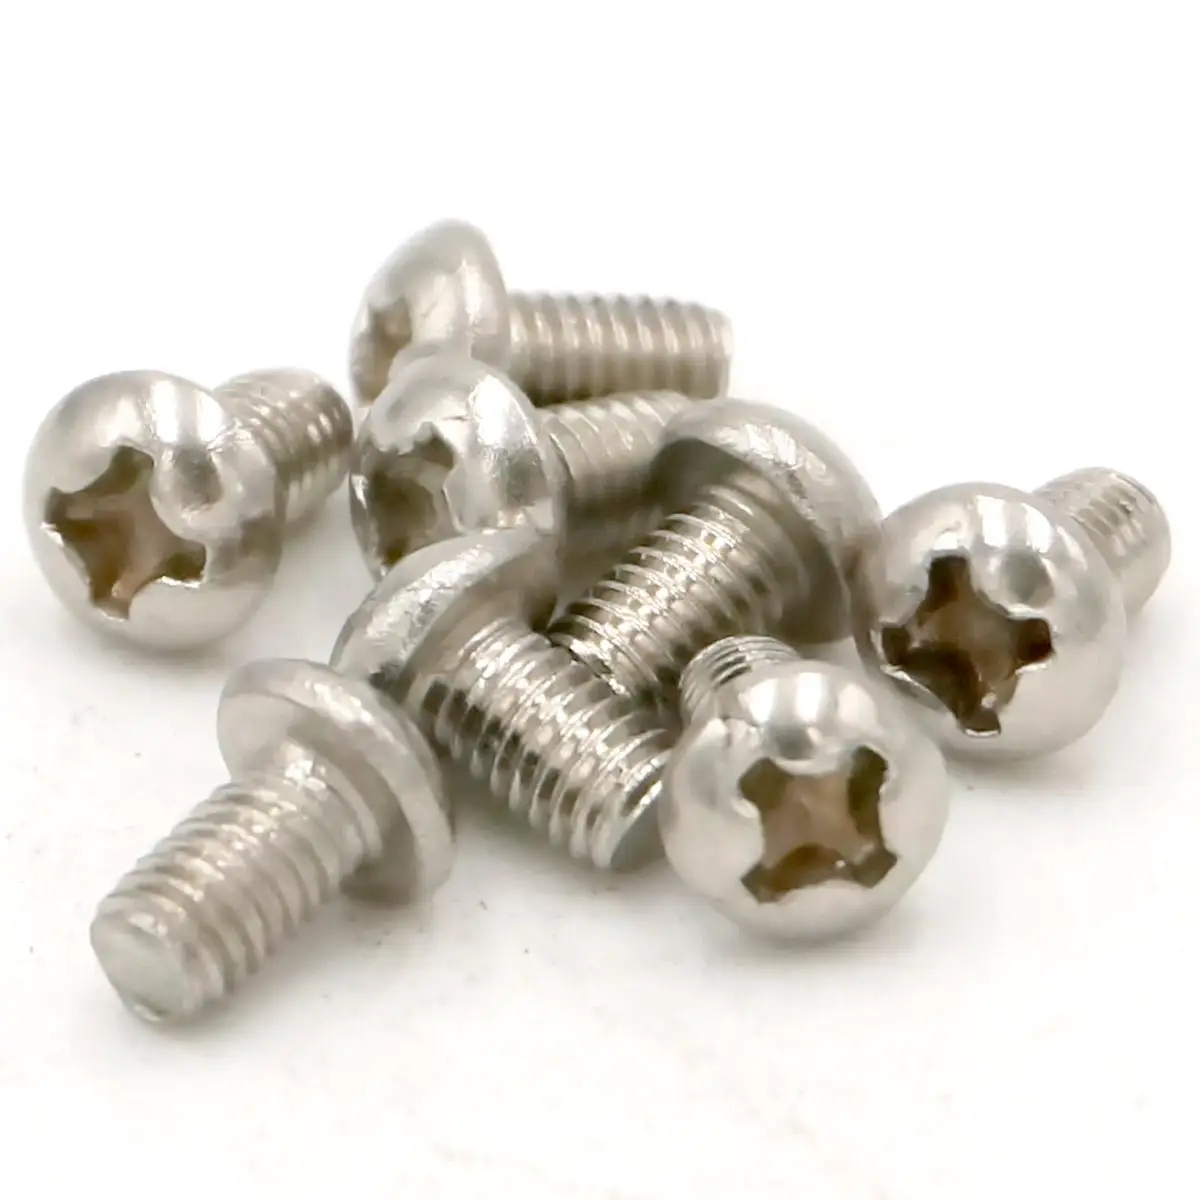 

50pcs M3*5 Pitch 0.5 Phillips Pan Head 304 Stainless Steel Cross Recessed Machine Screws Cap Bolts Nuts